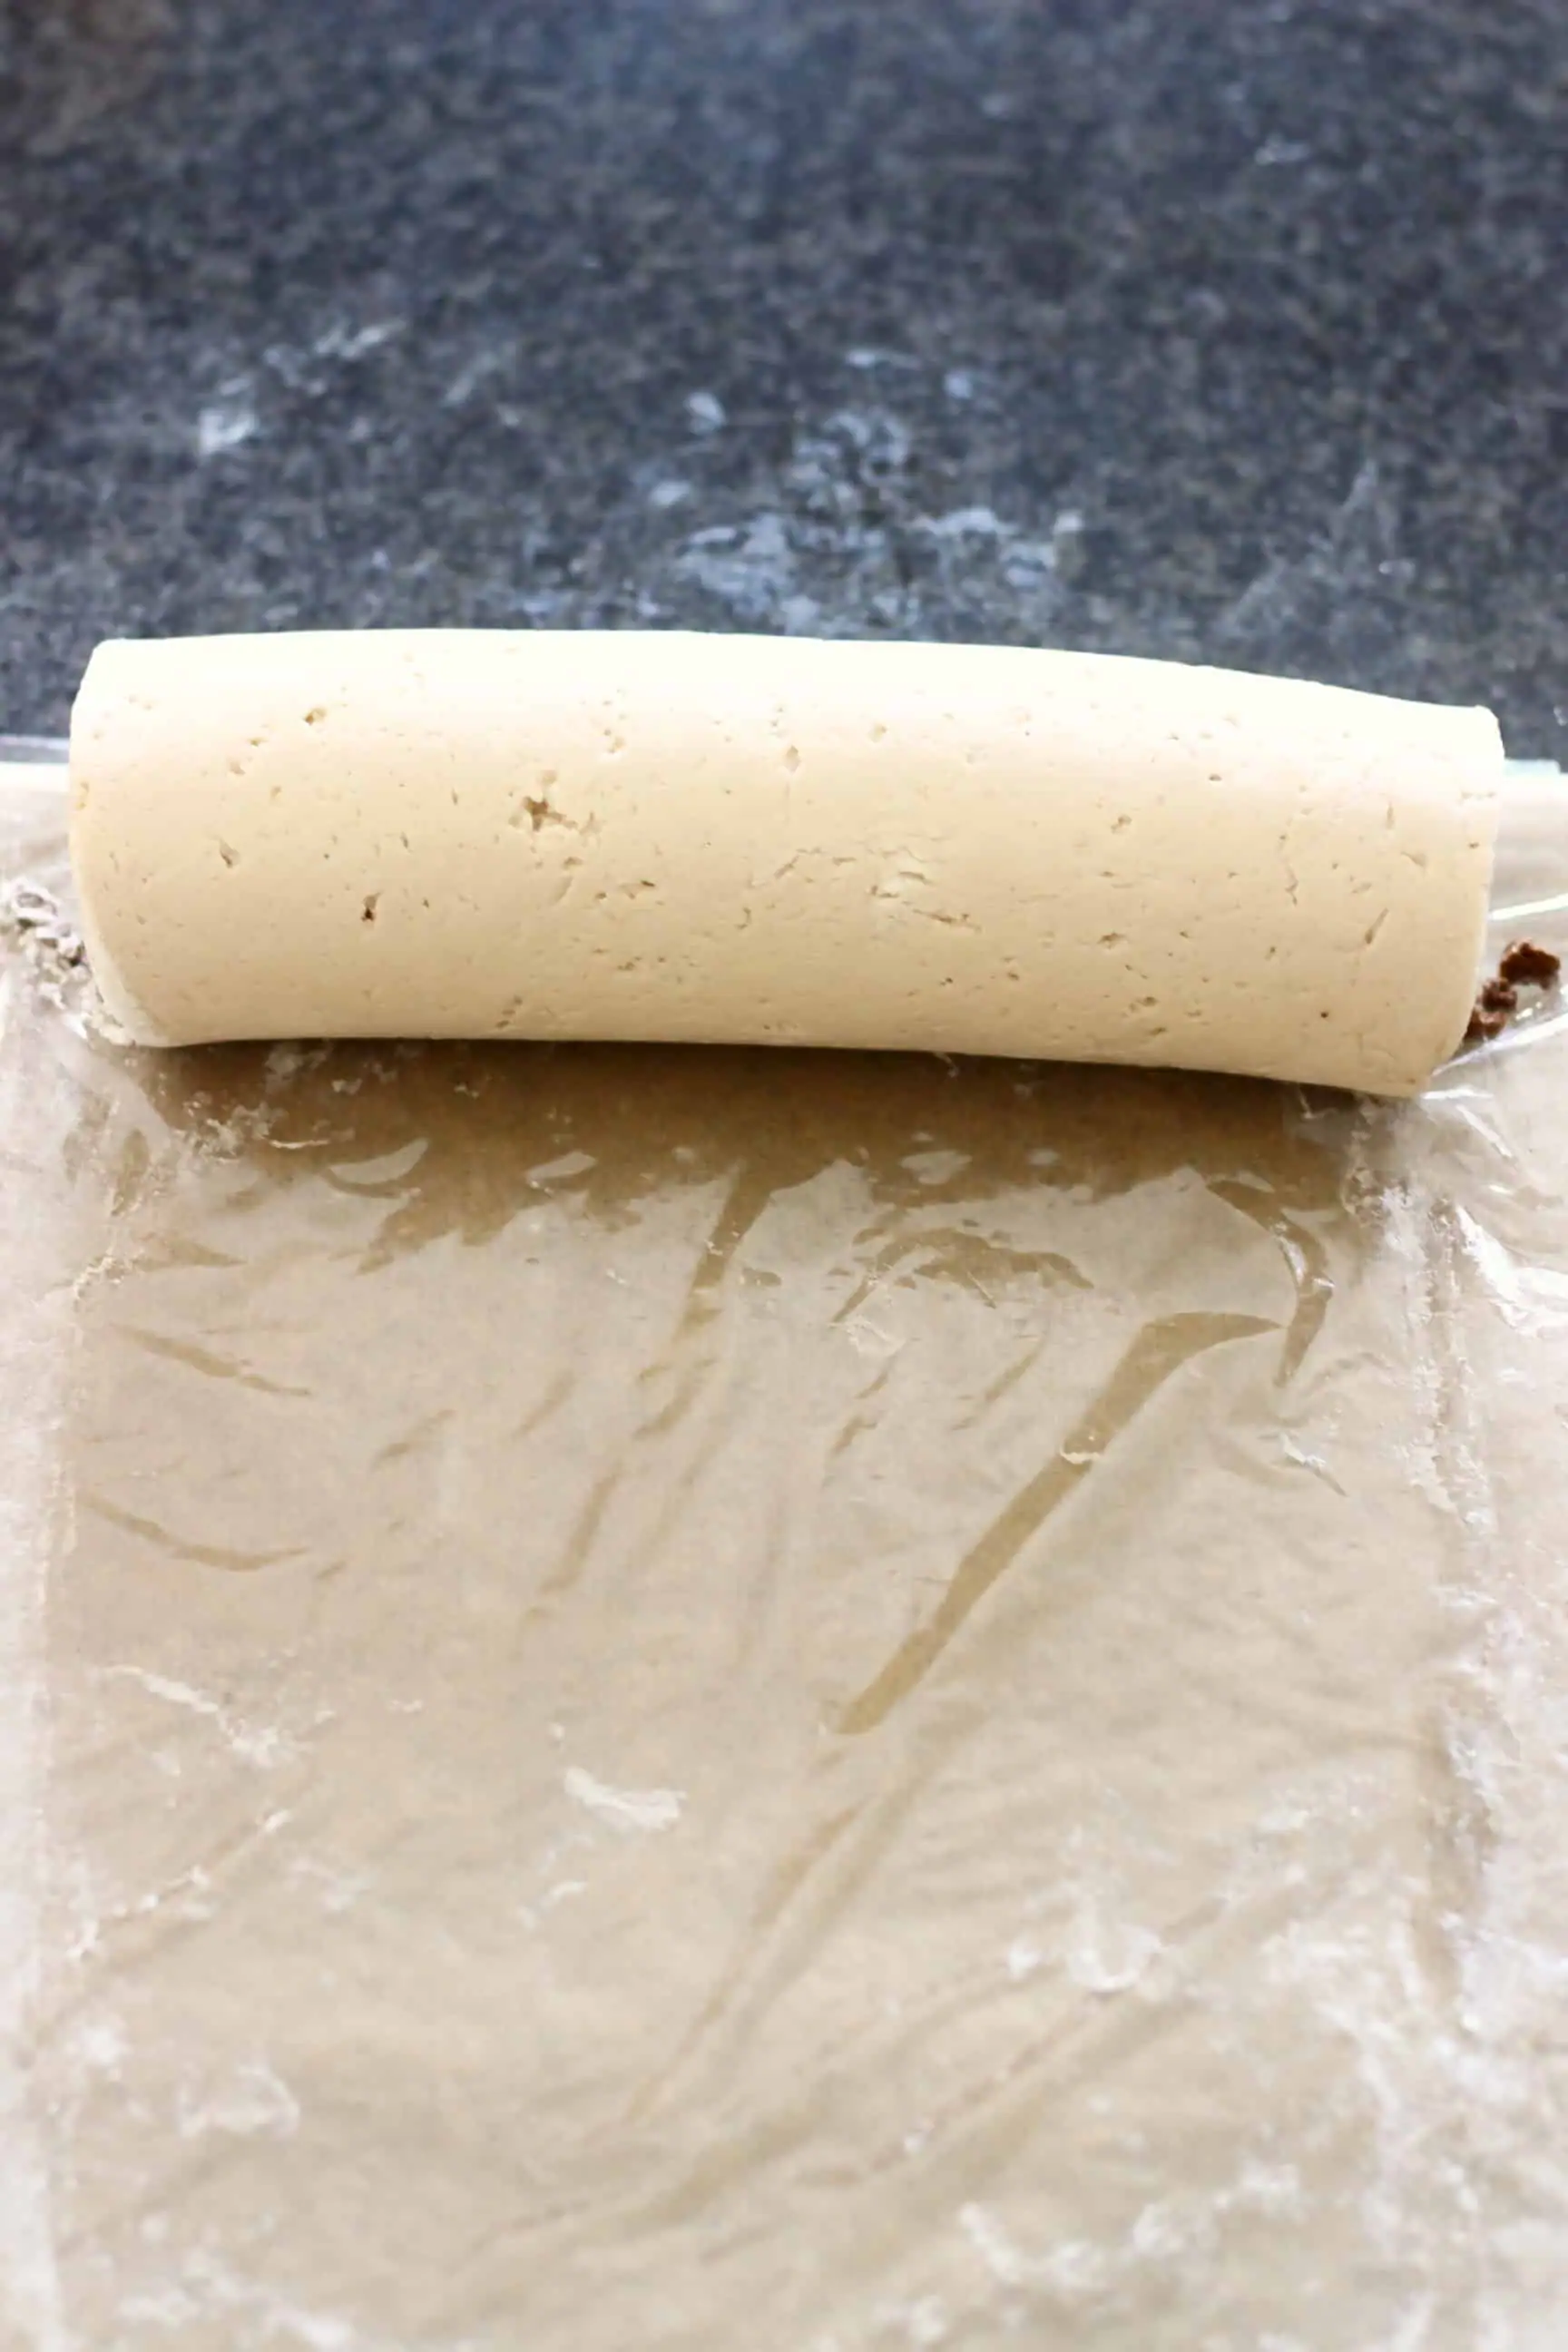 Gluten-free vegan cinnamon roll dough filled with cinnamon sugar rolled into a sausage shape on a piece of cling film on baking paper